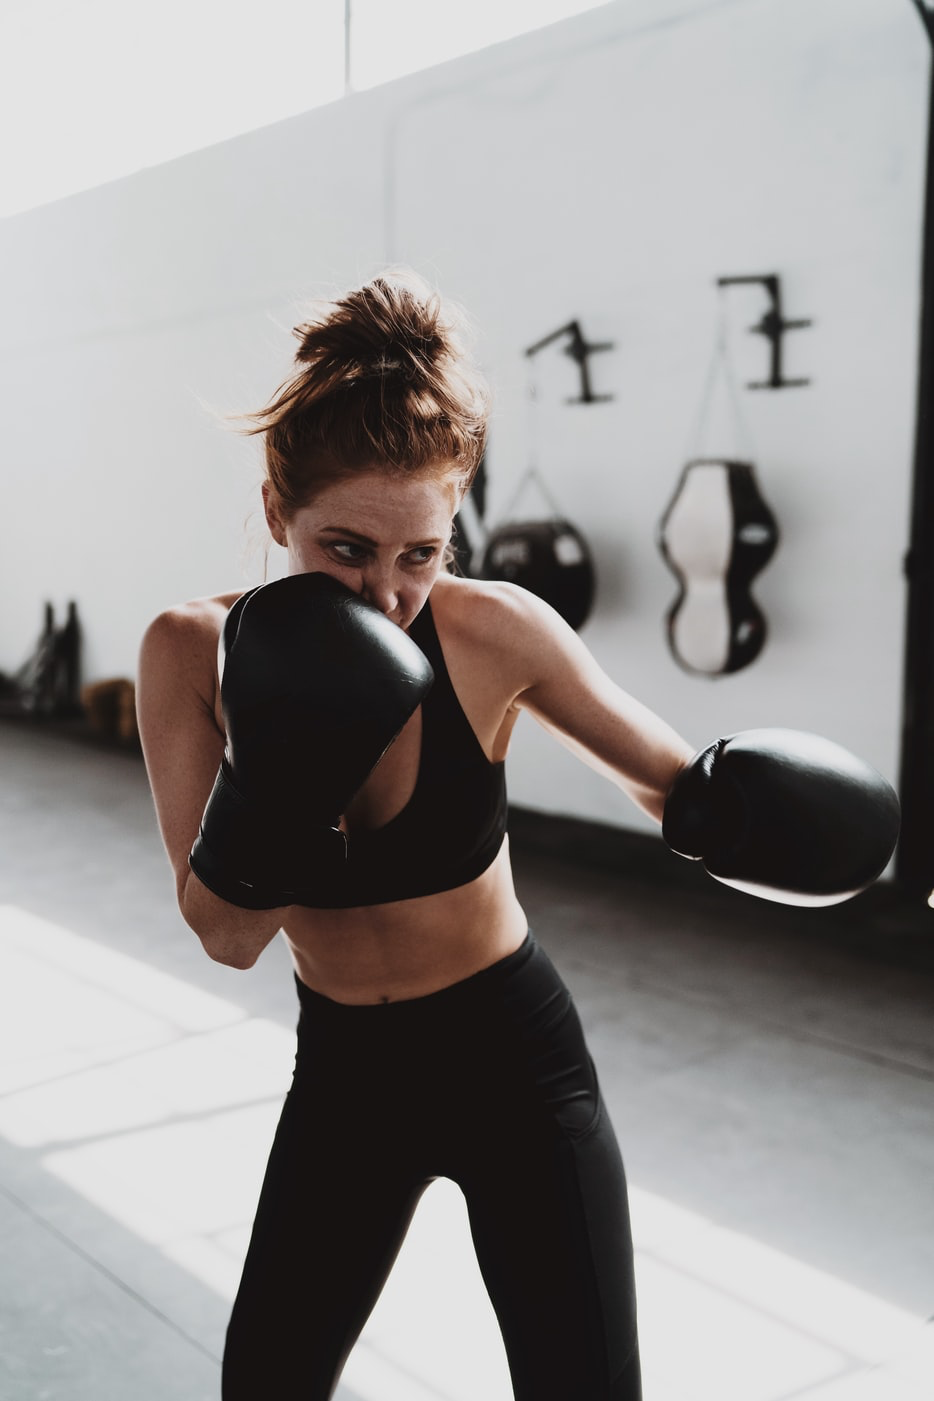 Woman practices boxing sequence at a local boxing studio.